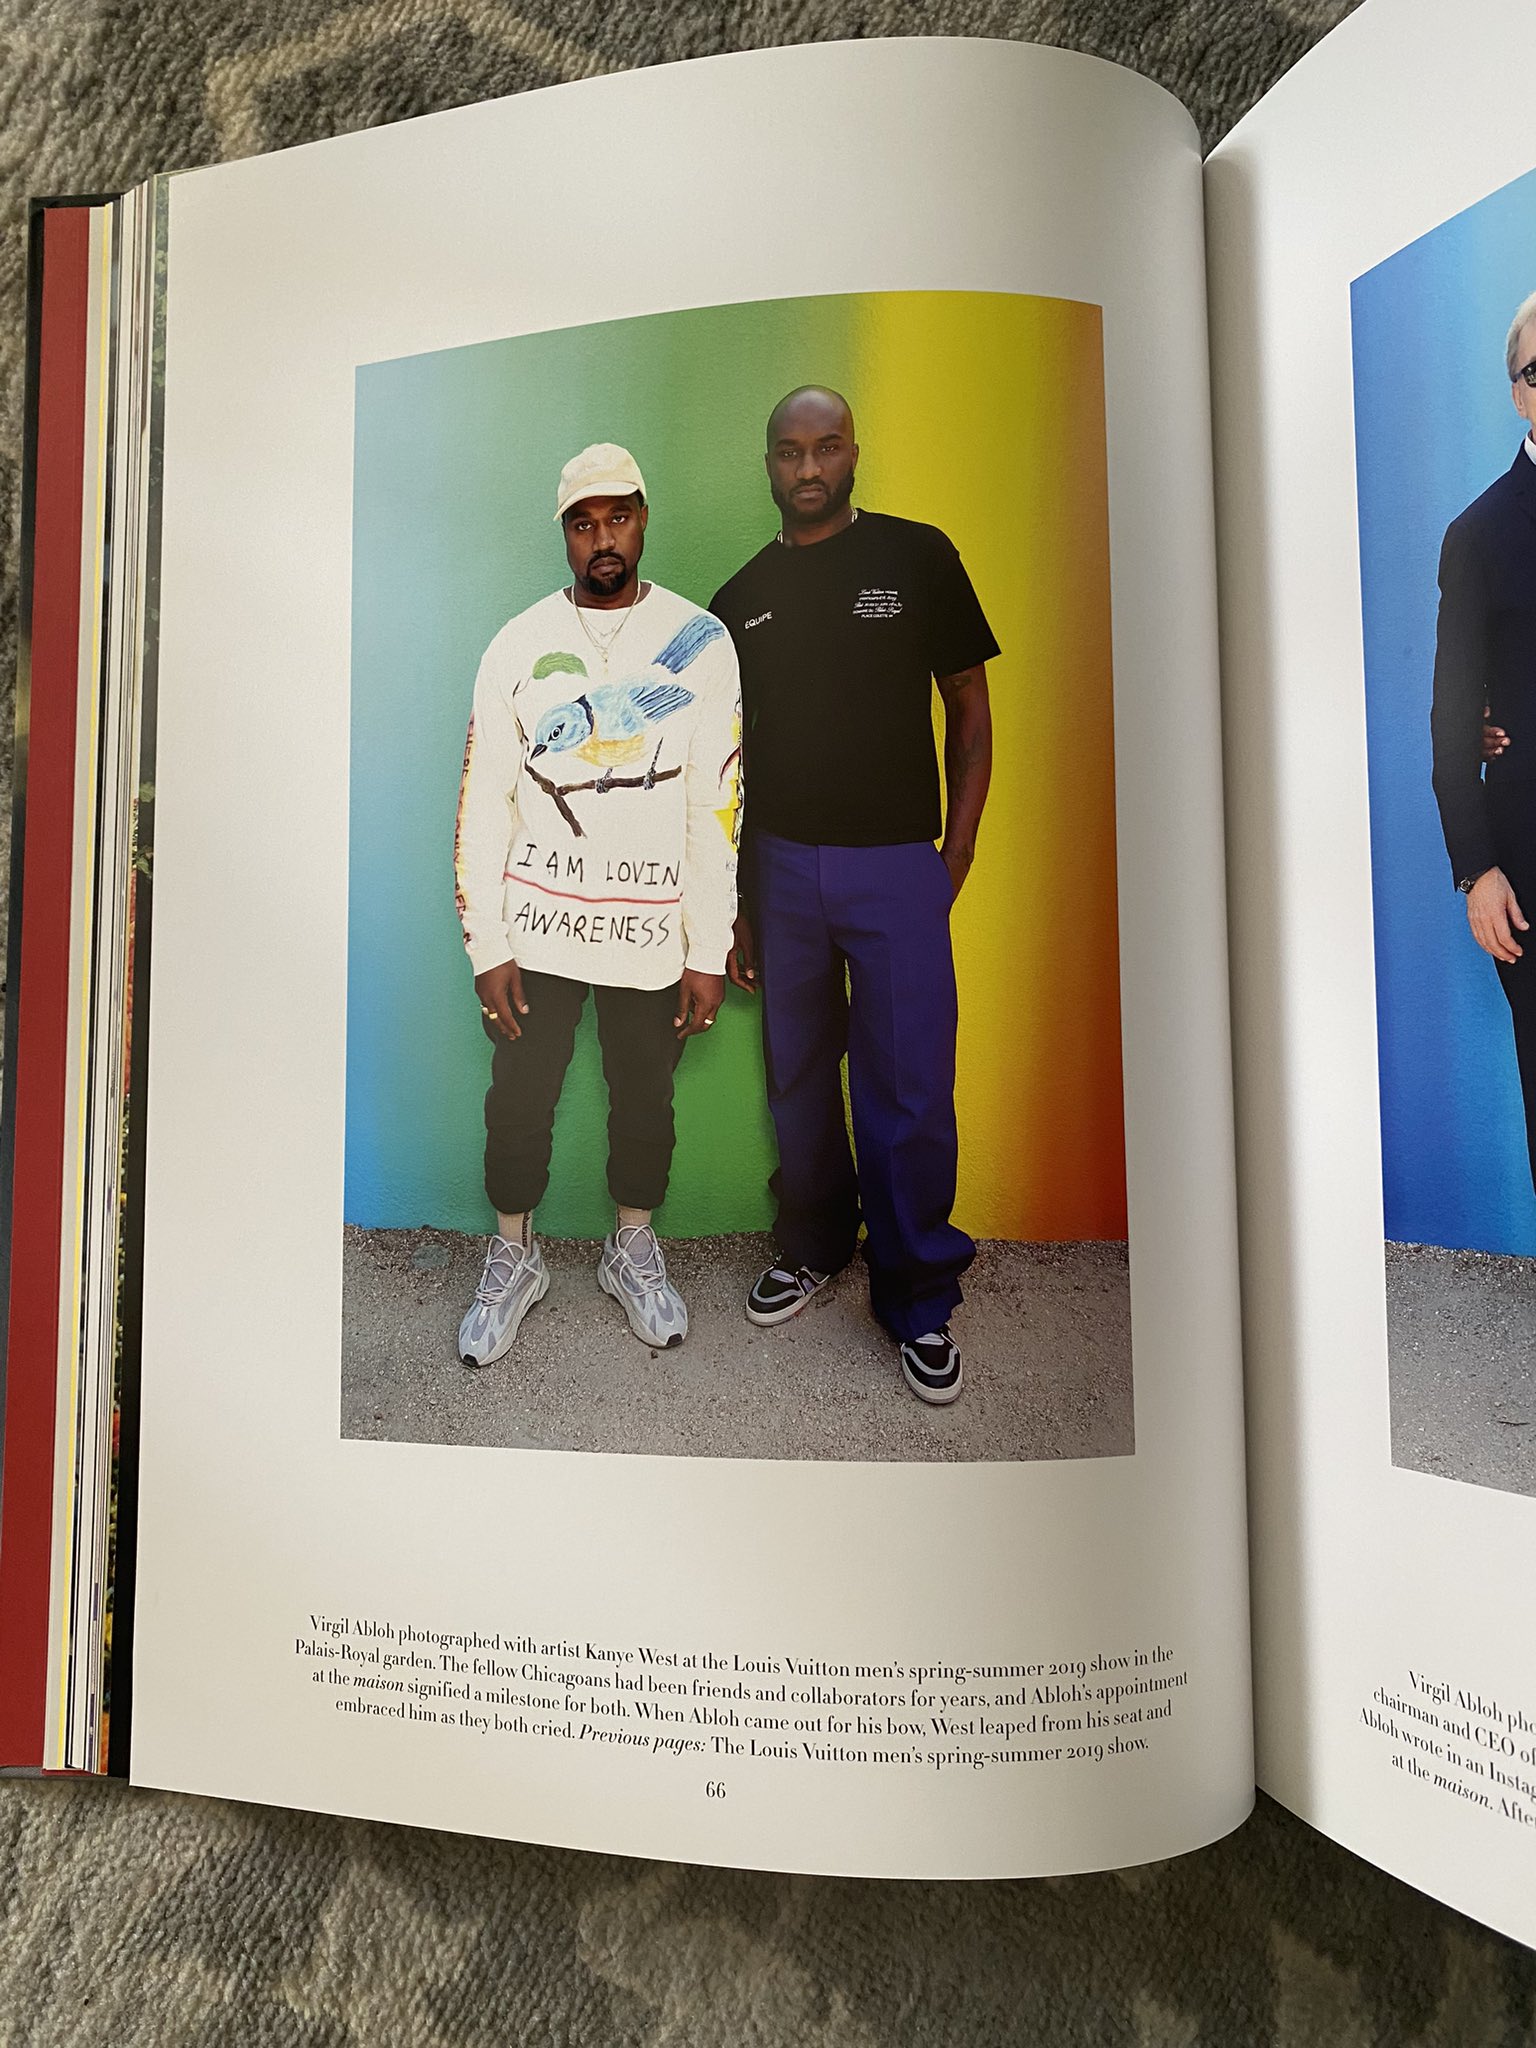 Both Virgil Abloh Book Arrived! Anybody know why they took the book off the  LV site? : r/Louisvuitton